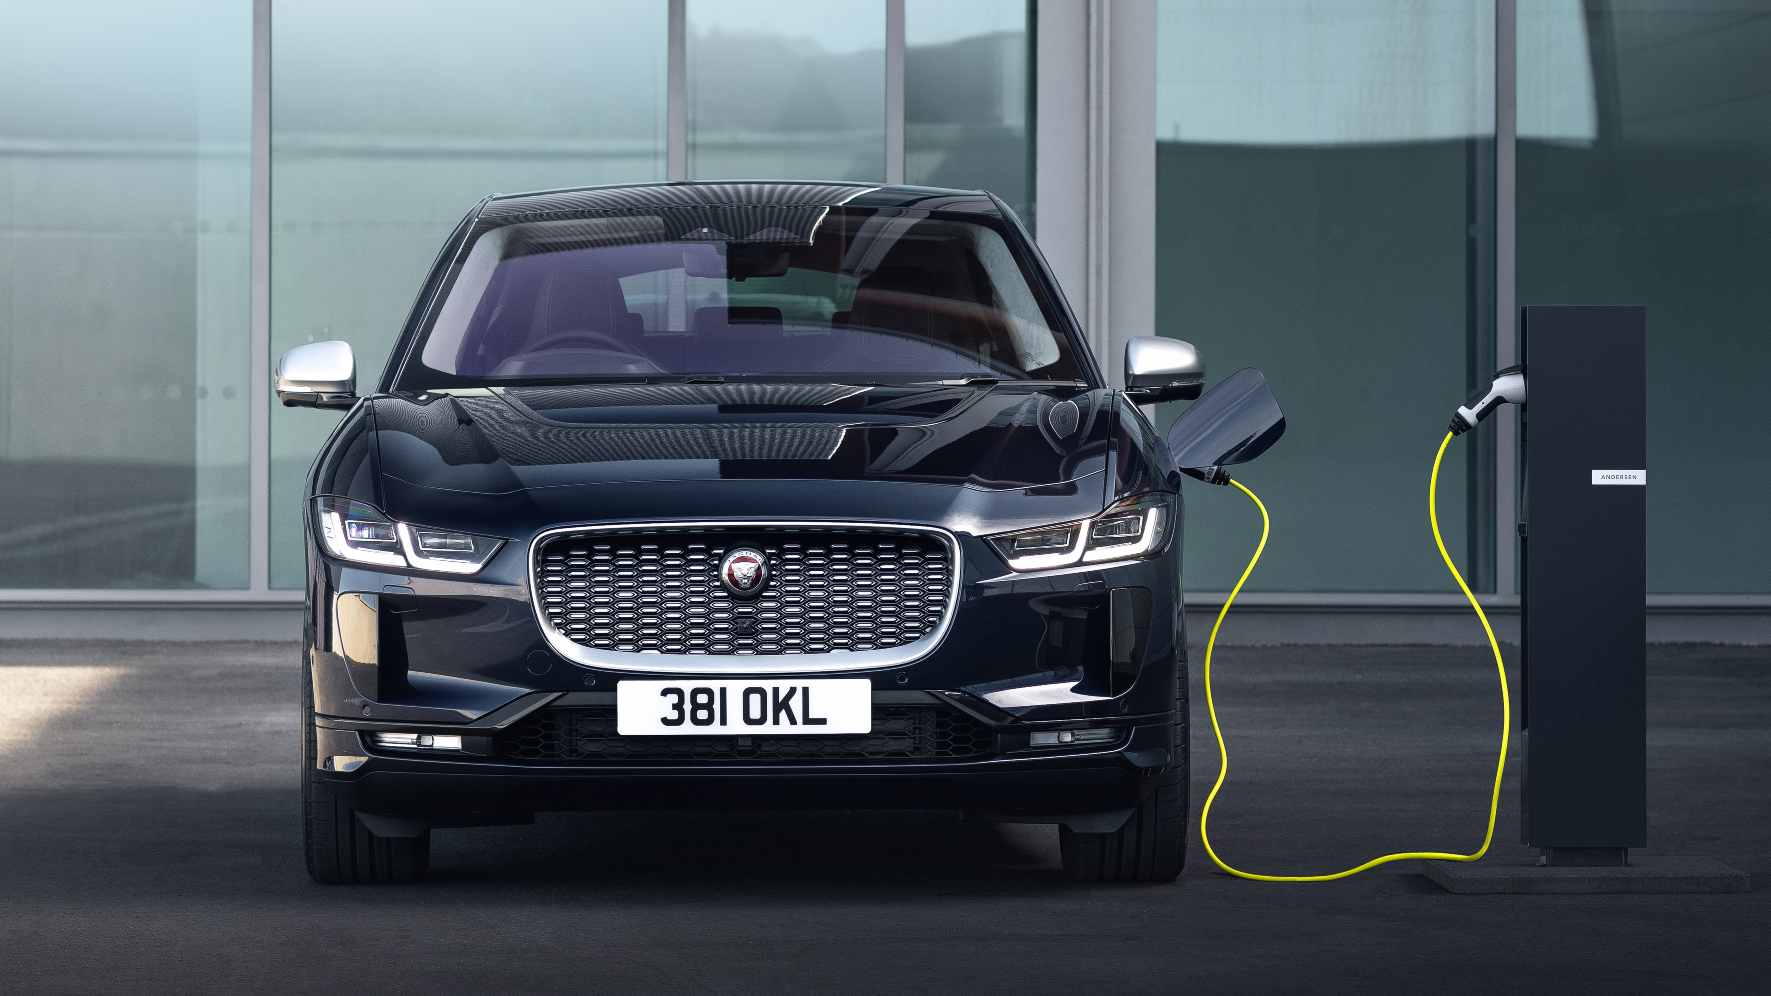  Jaguar will become a pure-EV manufacturer by 2025; first all-electric Land Rover due in 2024